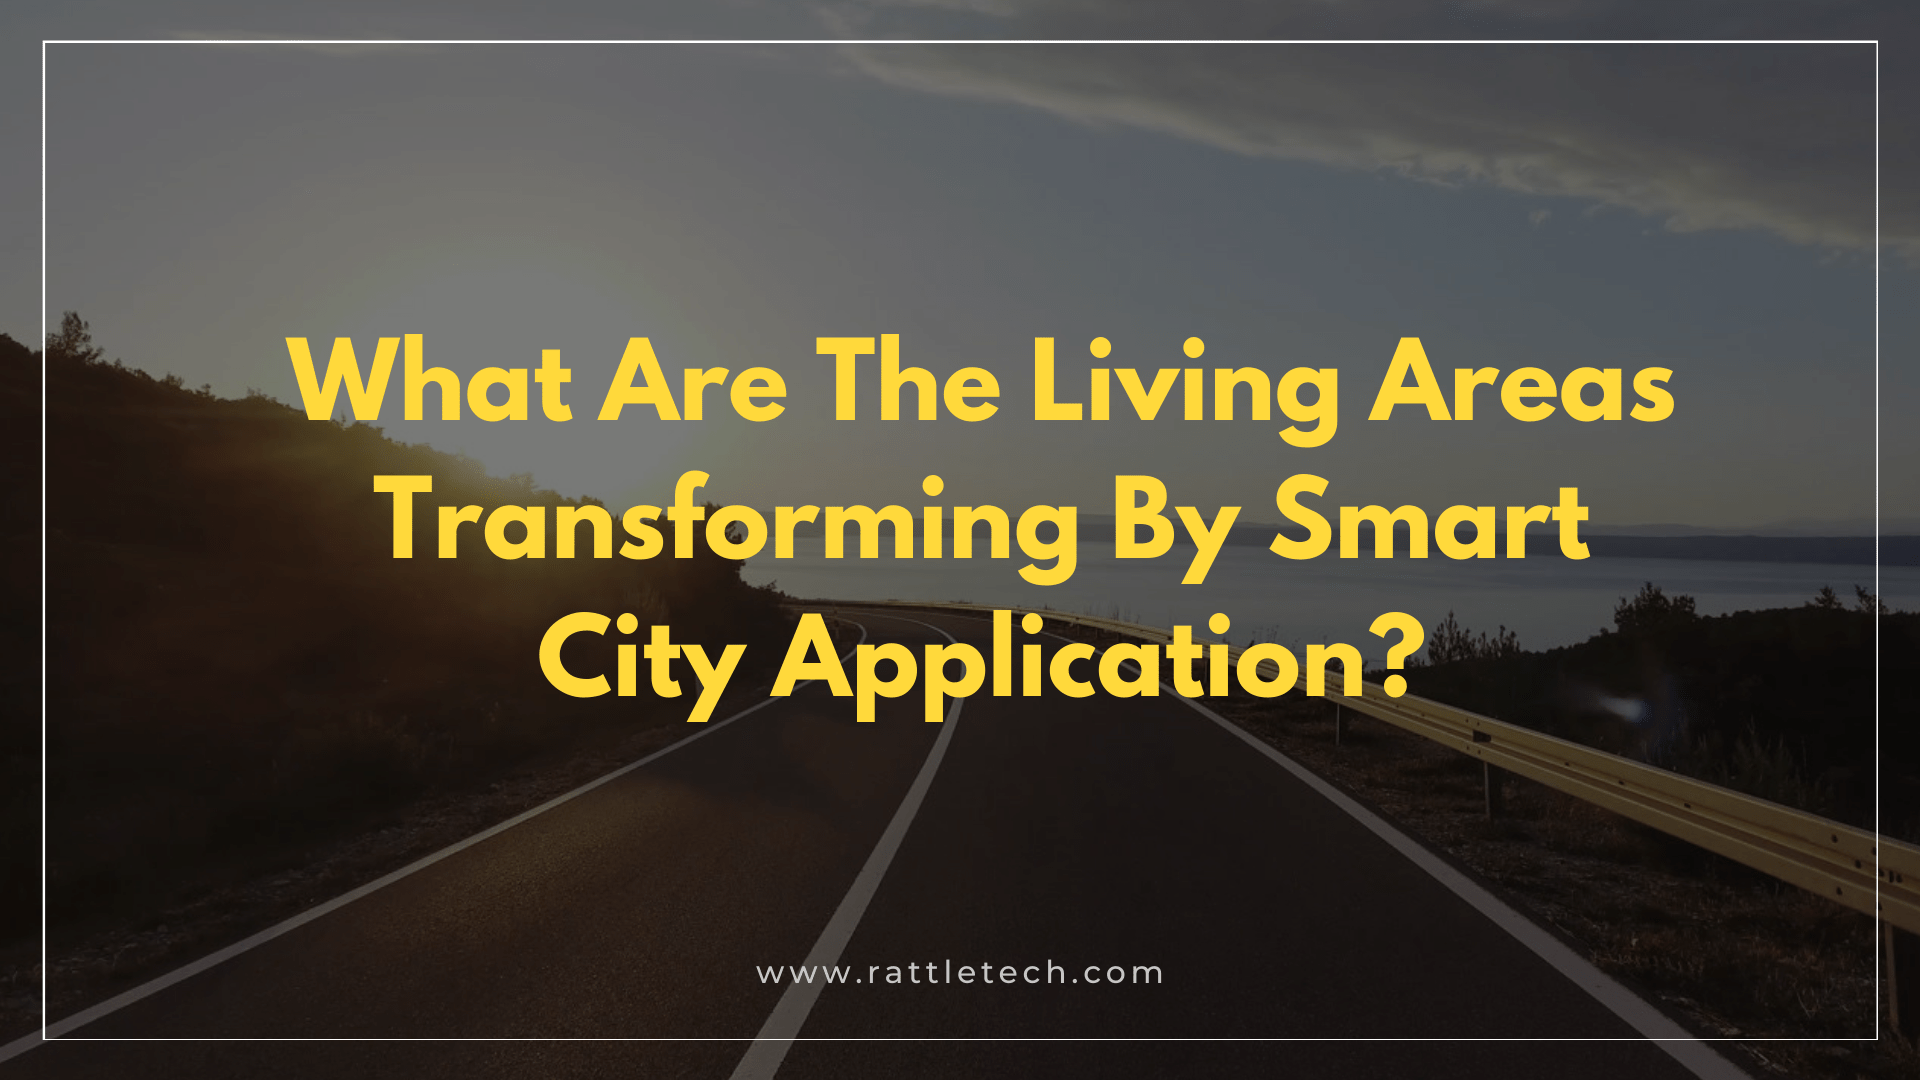 What Are The Living Areas Transforming By Smart City Application